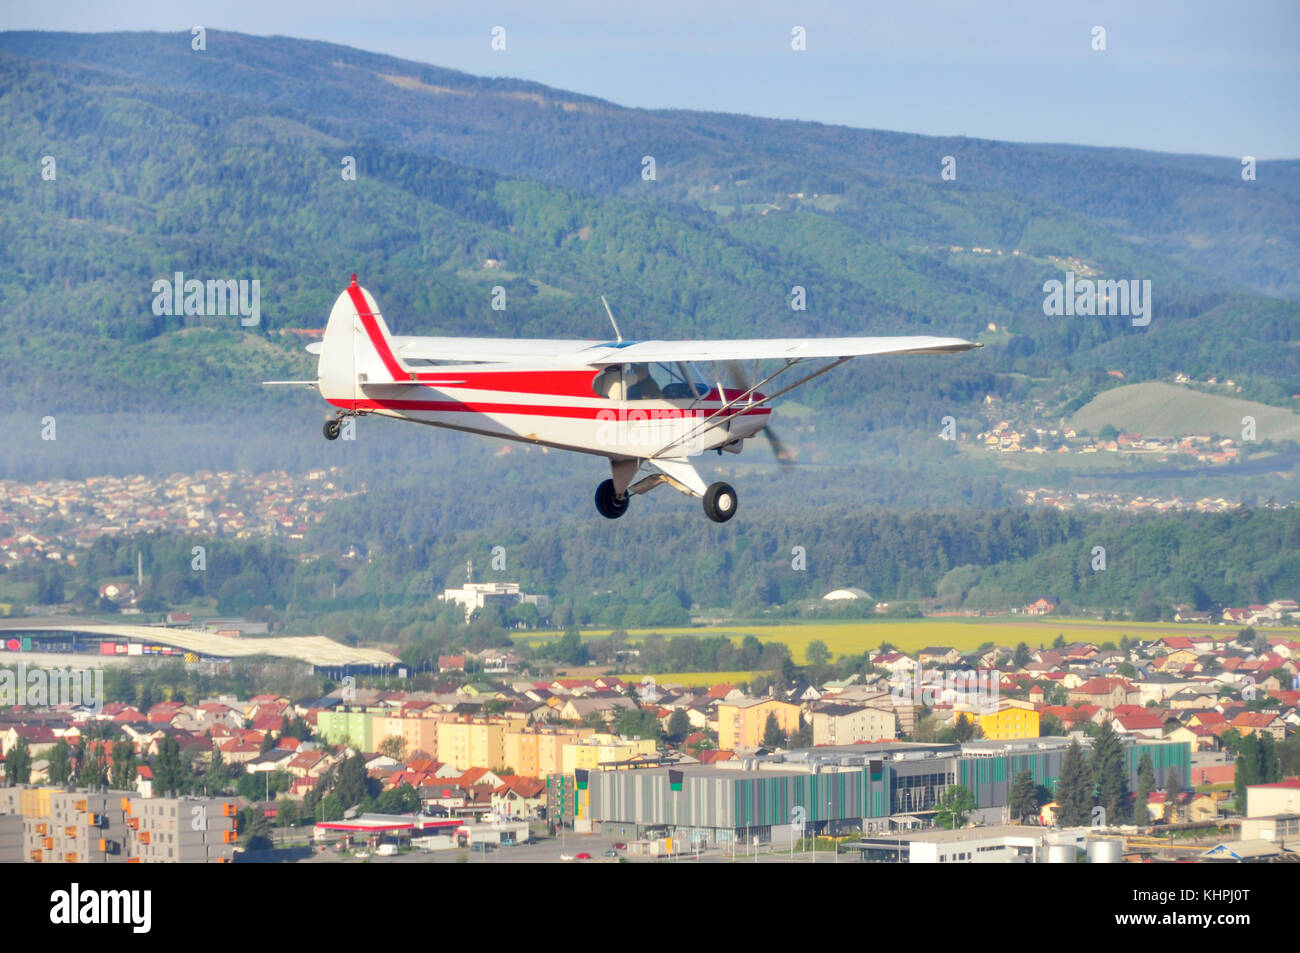 Airplane fly over city, light aircraft, single engine Stock Photo